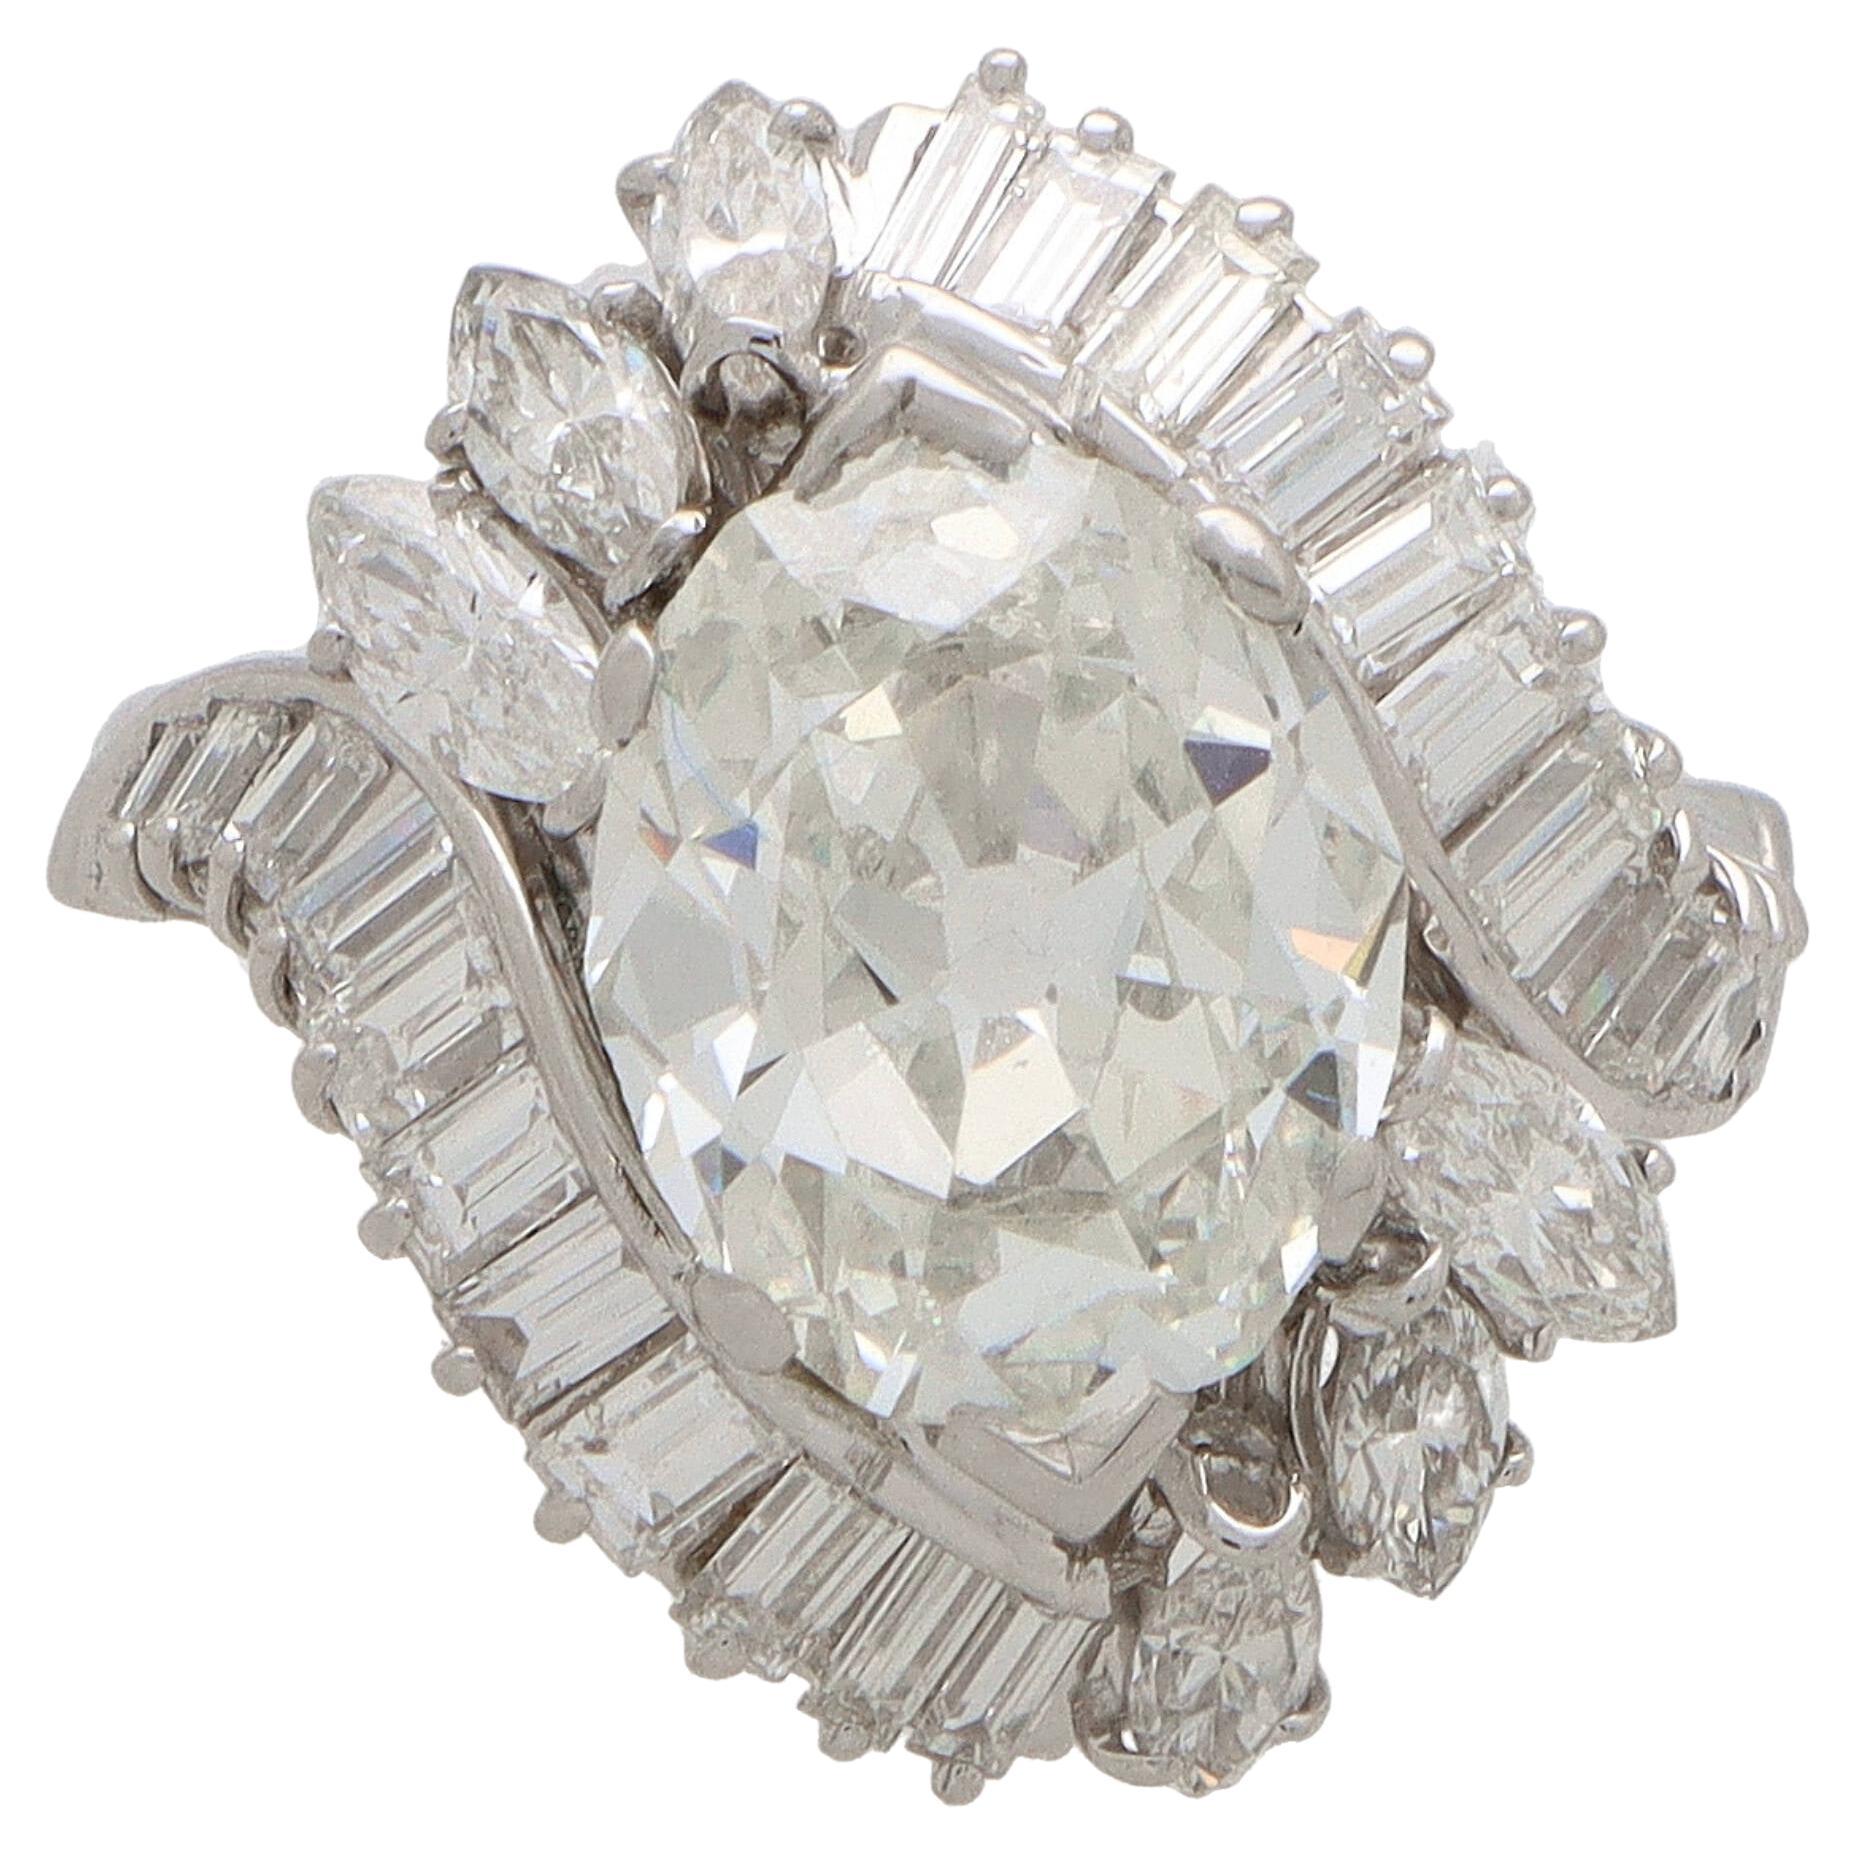 Vintage Old Marquise Cut Diamond Cluster Ring in Platinum